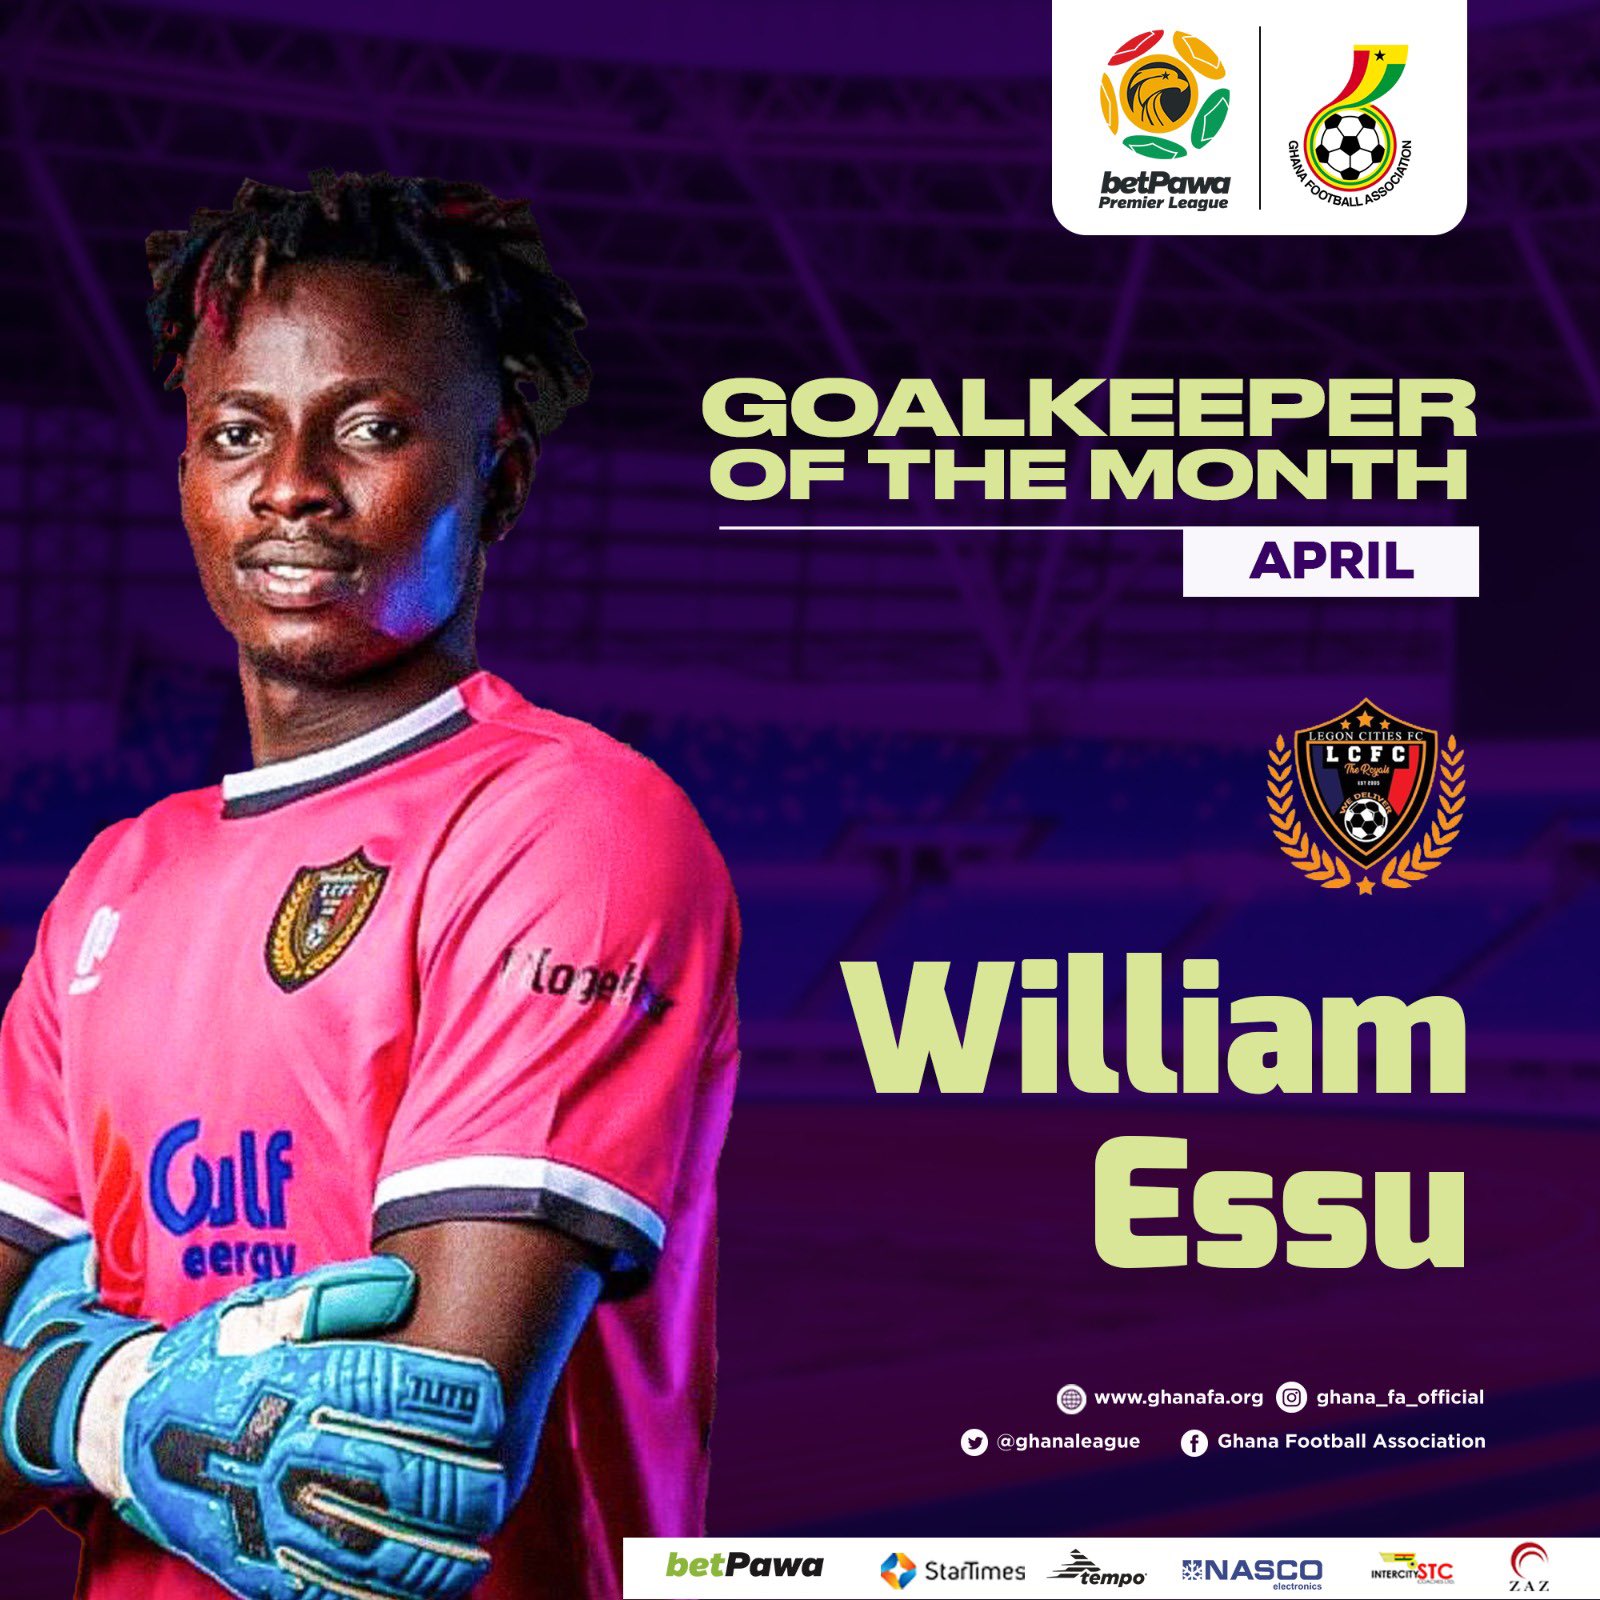 Ghana Premier League: William Essu named goalkeeper of the month for April